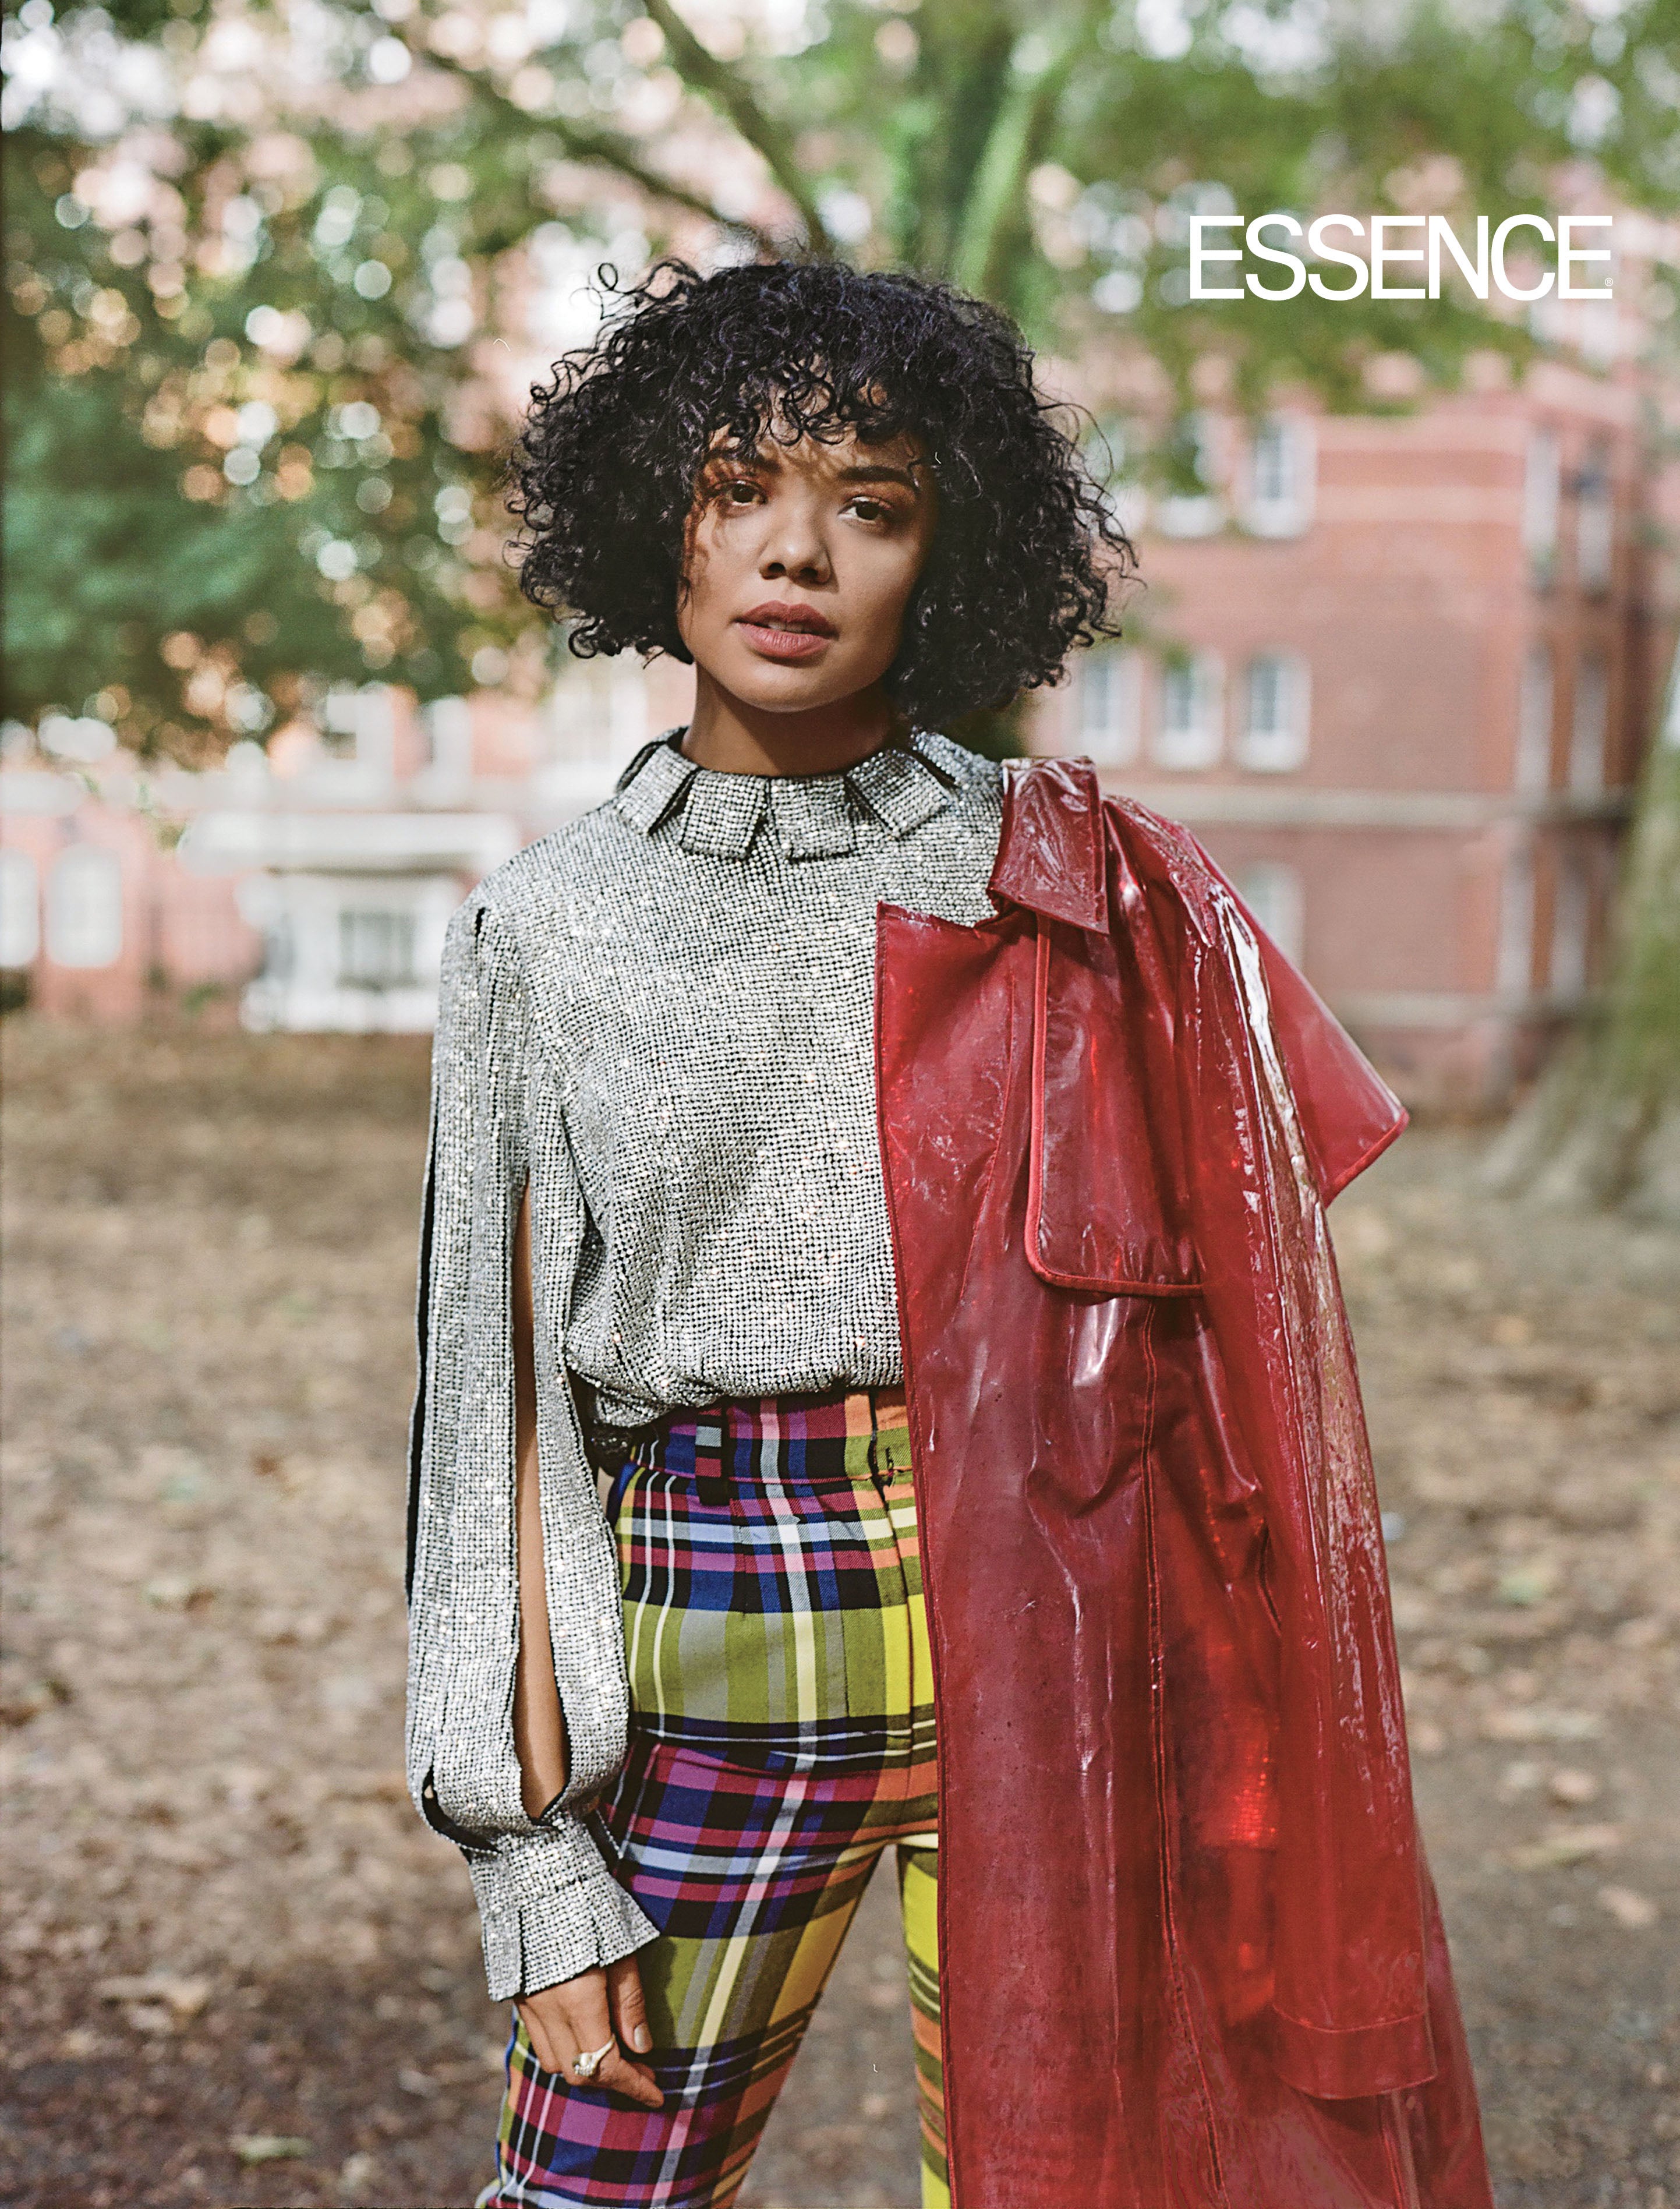 Tessa Thompson Reflects On Being Photographed By Shaniqwa Jarvis For ESSENCE's November Issue